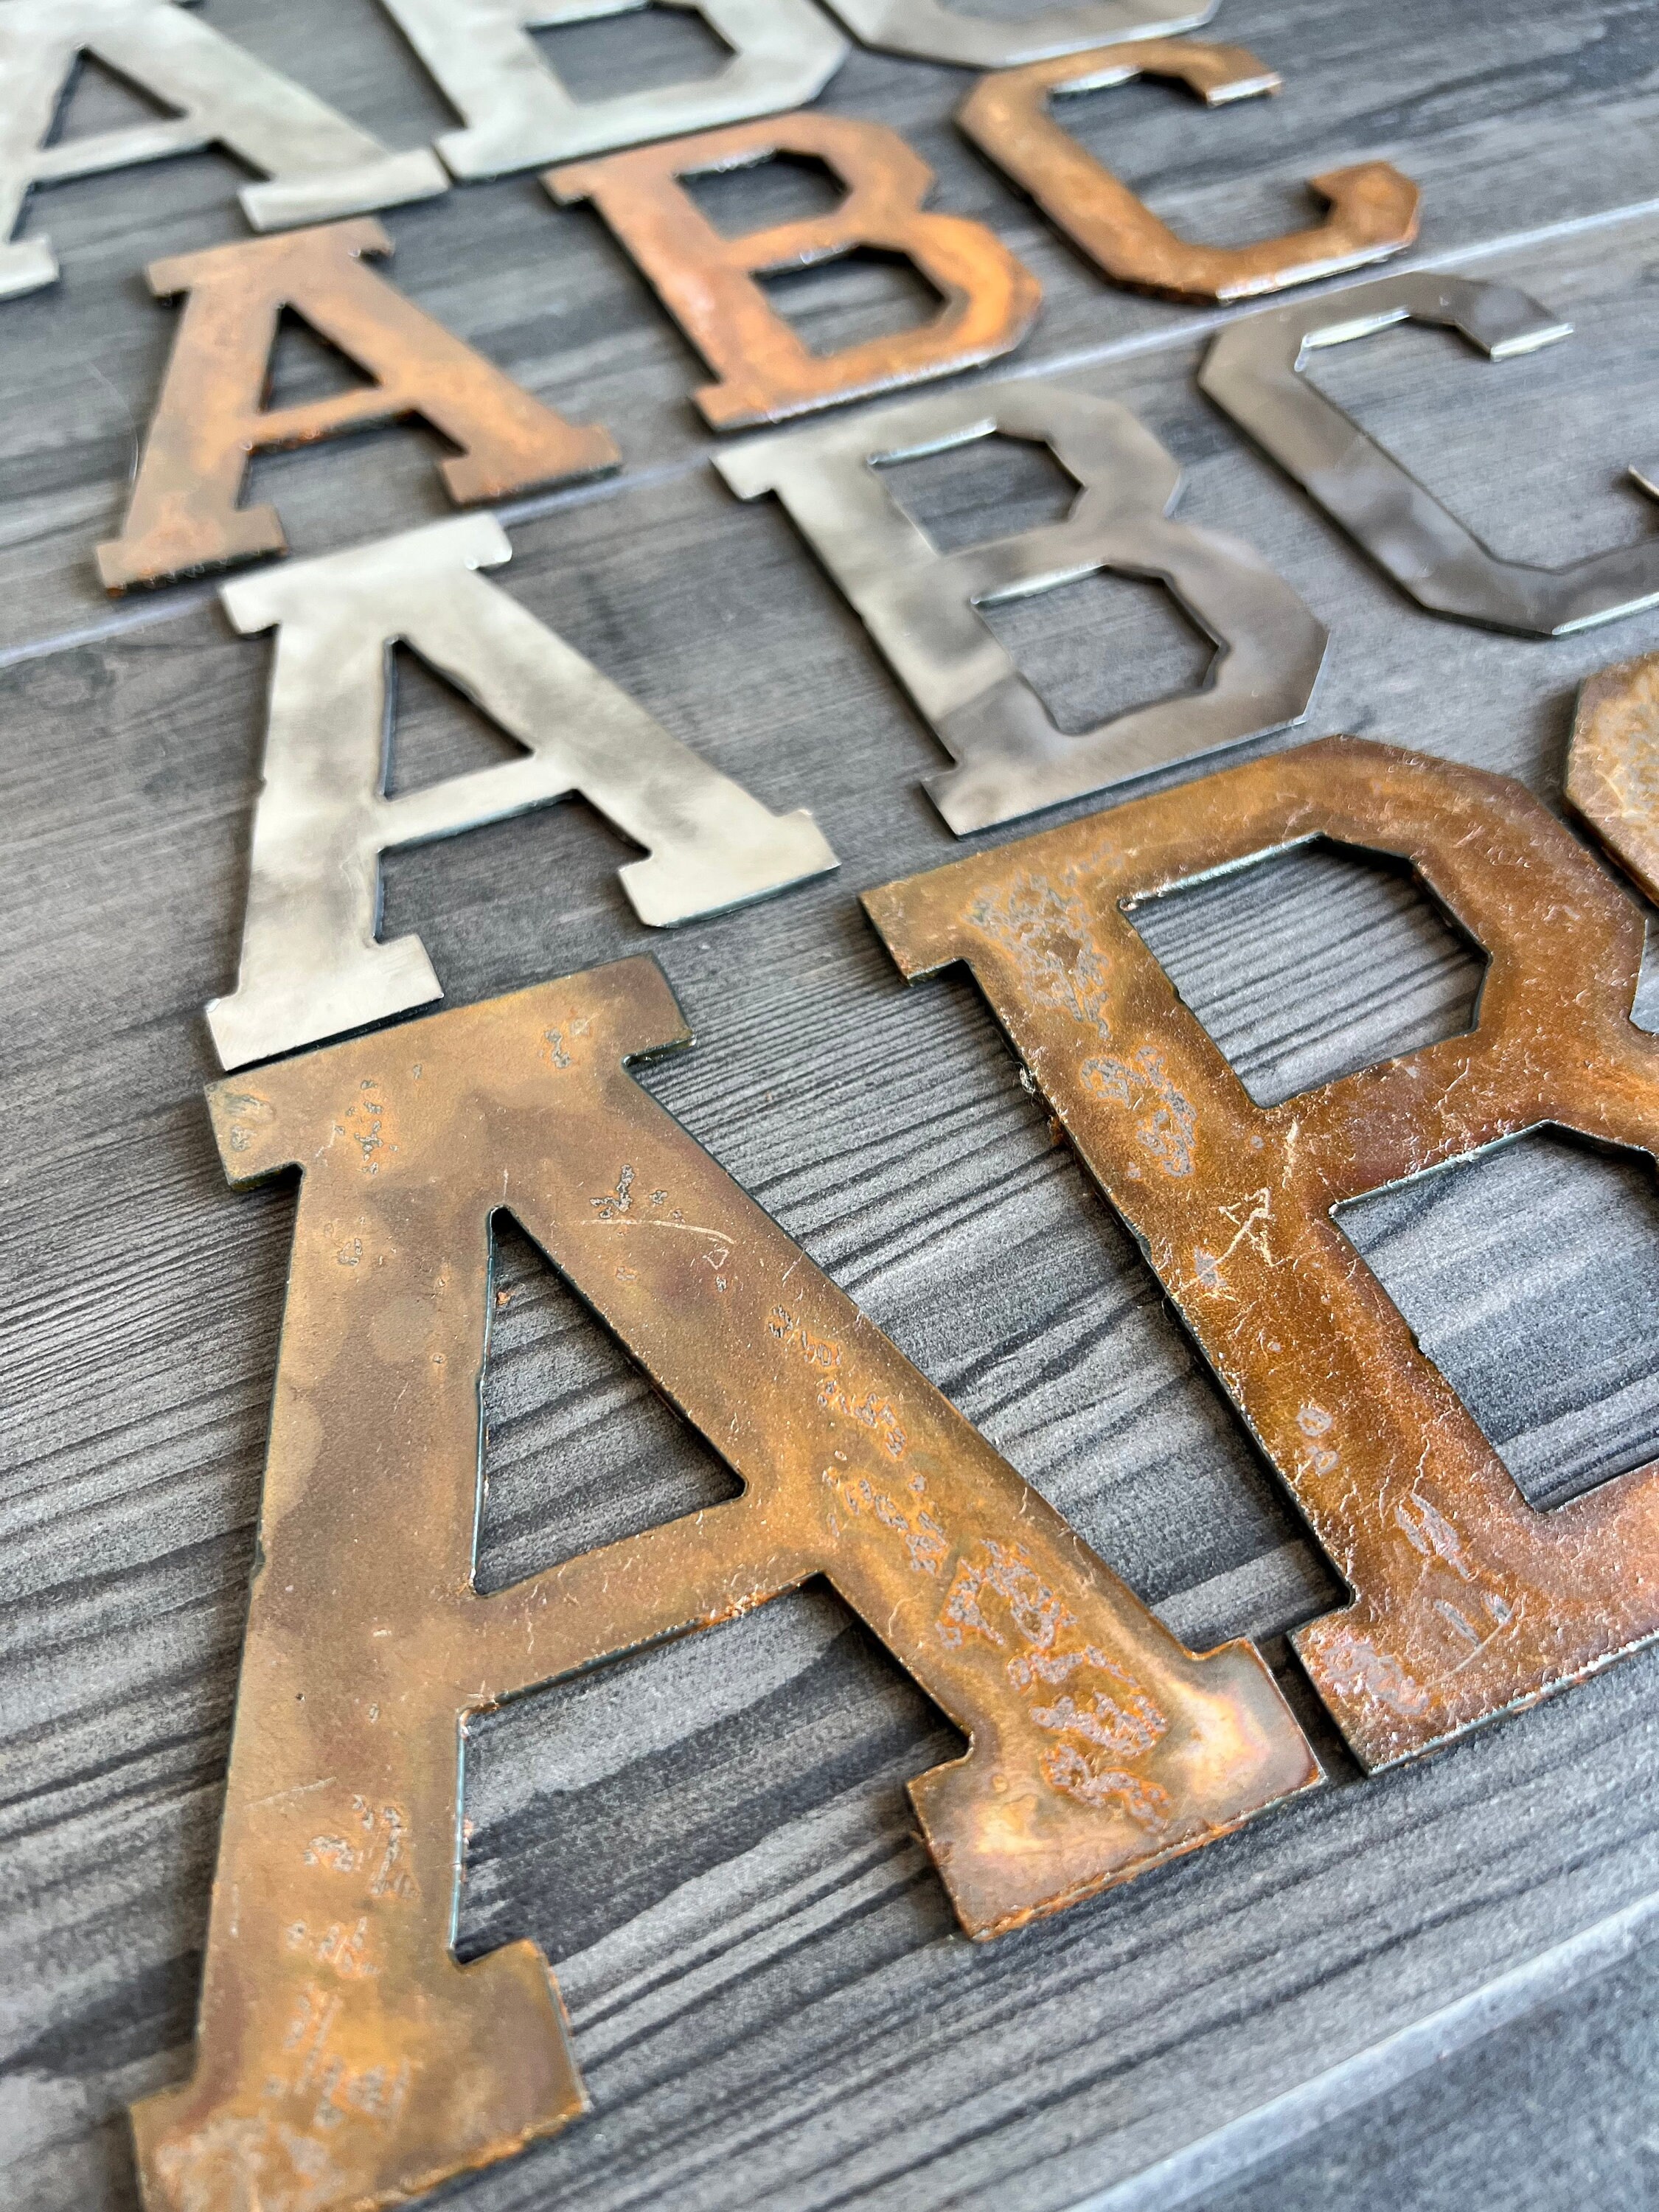 Small Cast Iron Metal Letters for DIY Crafts or Signs 